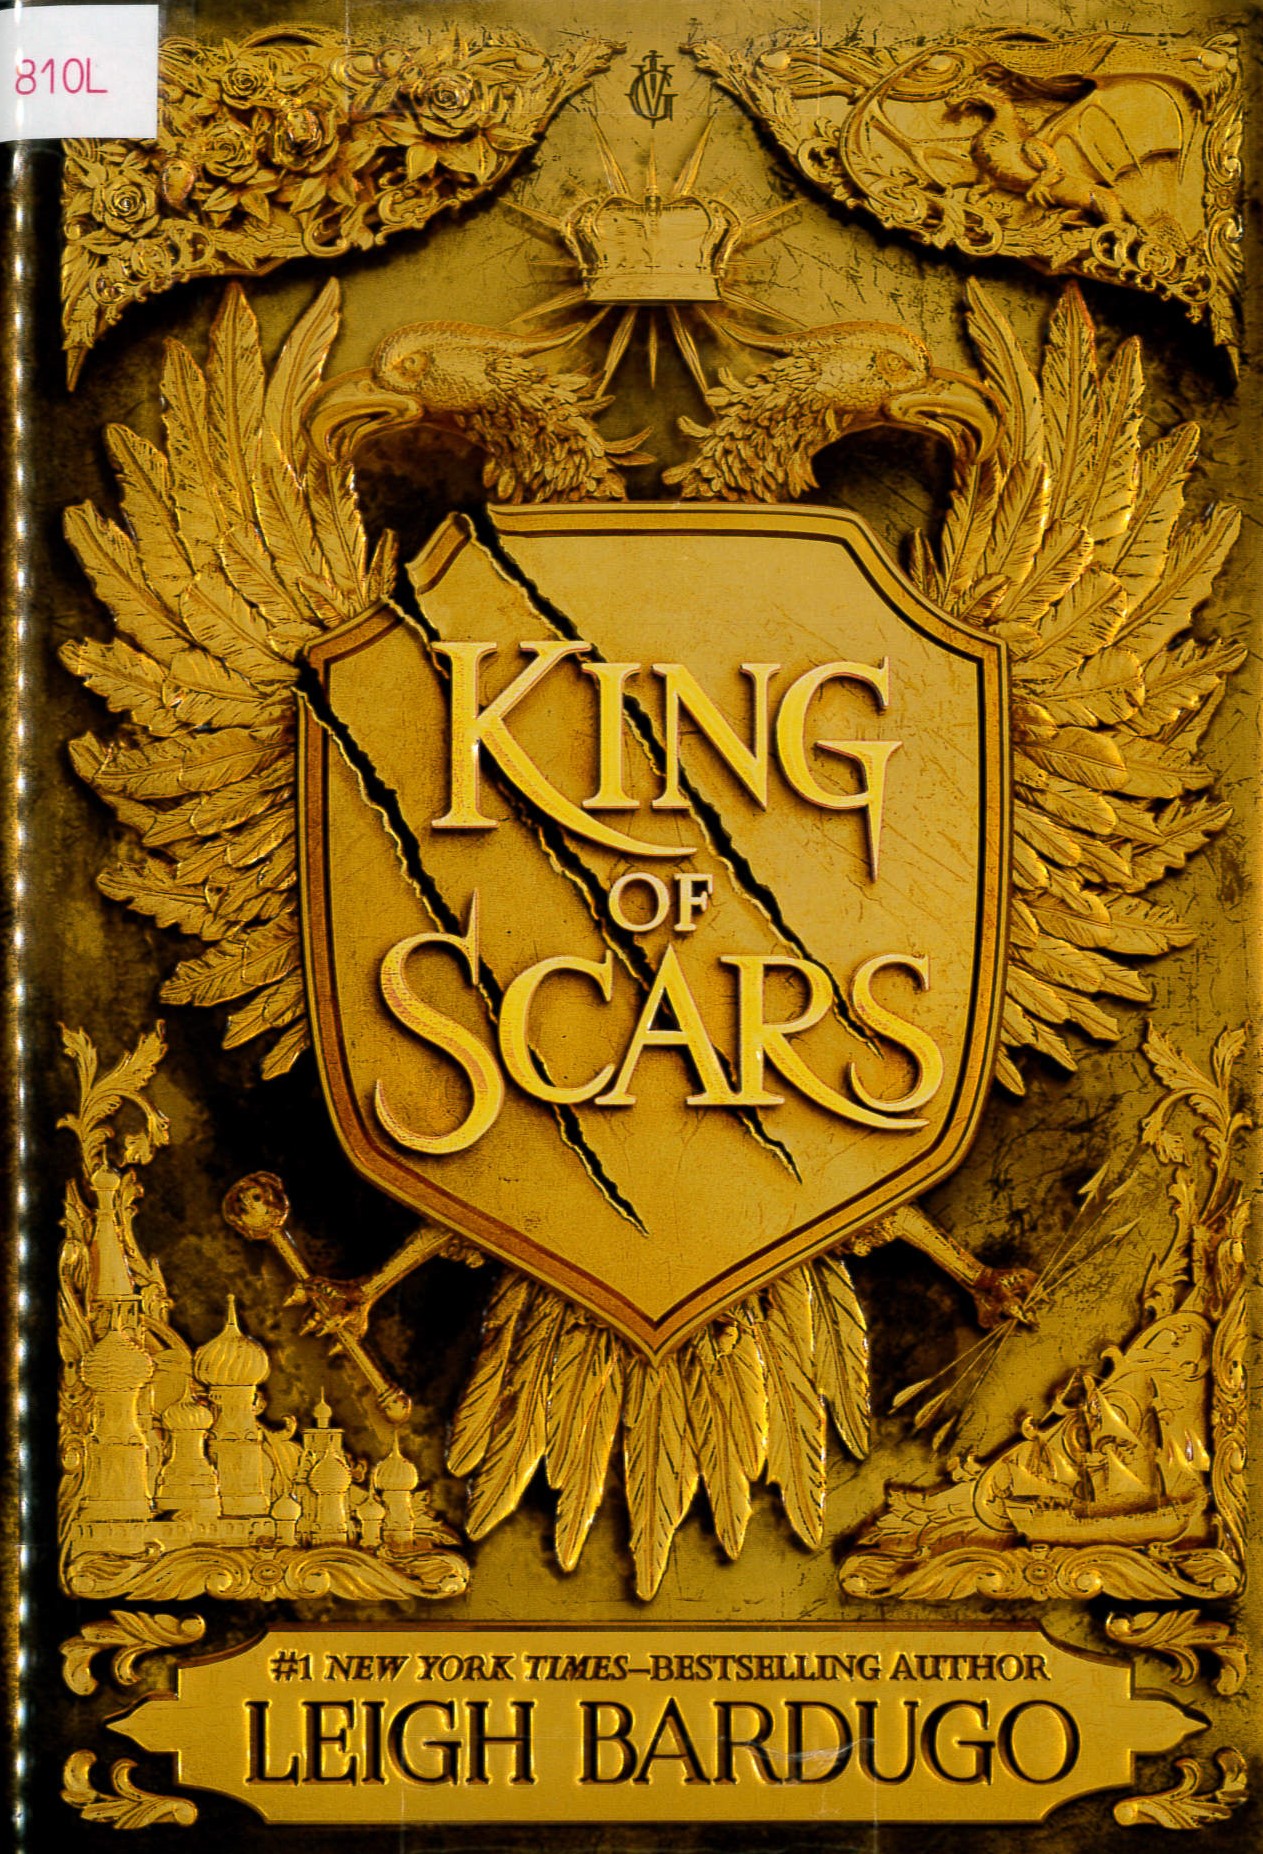 King of scars /